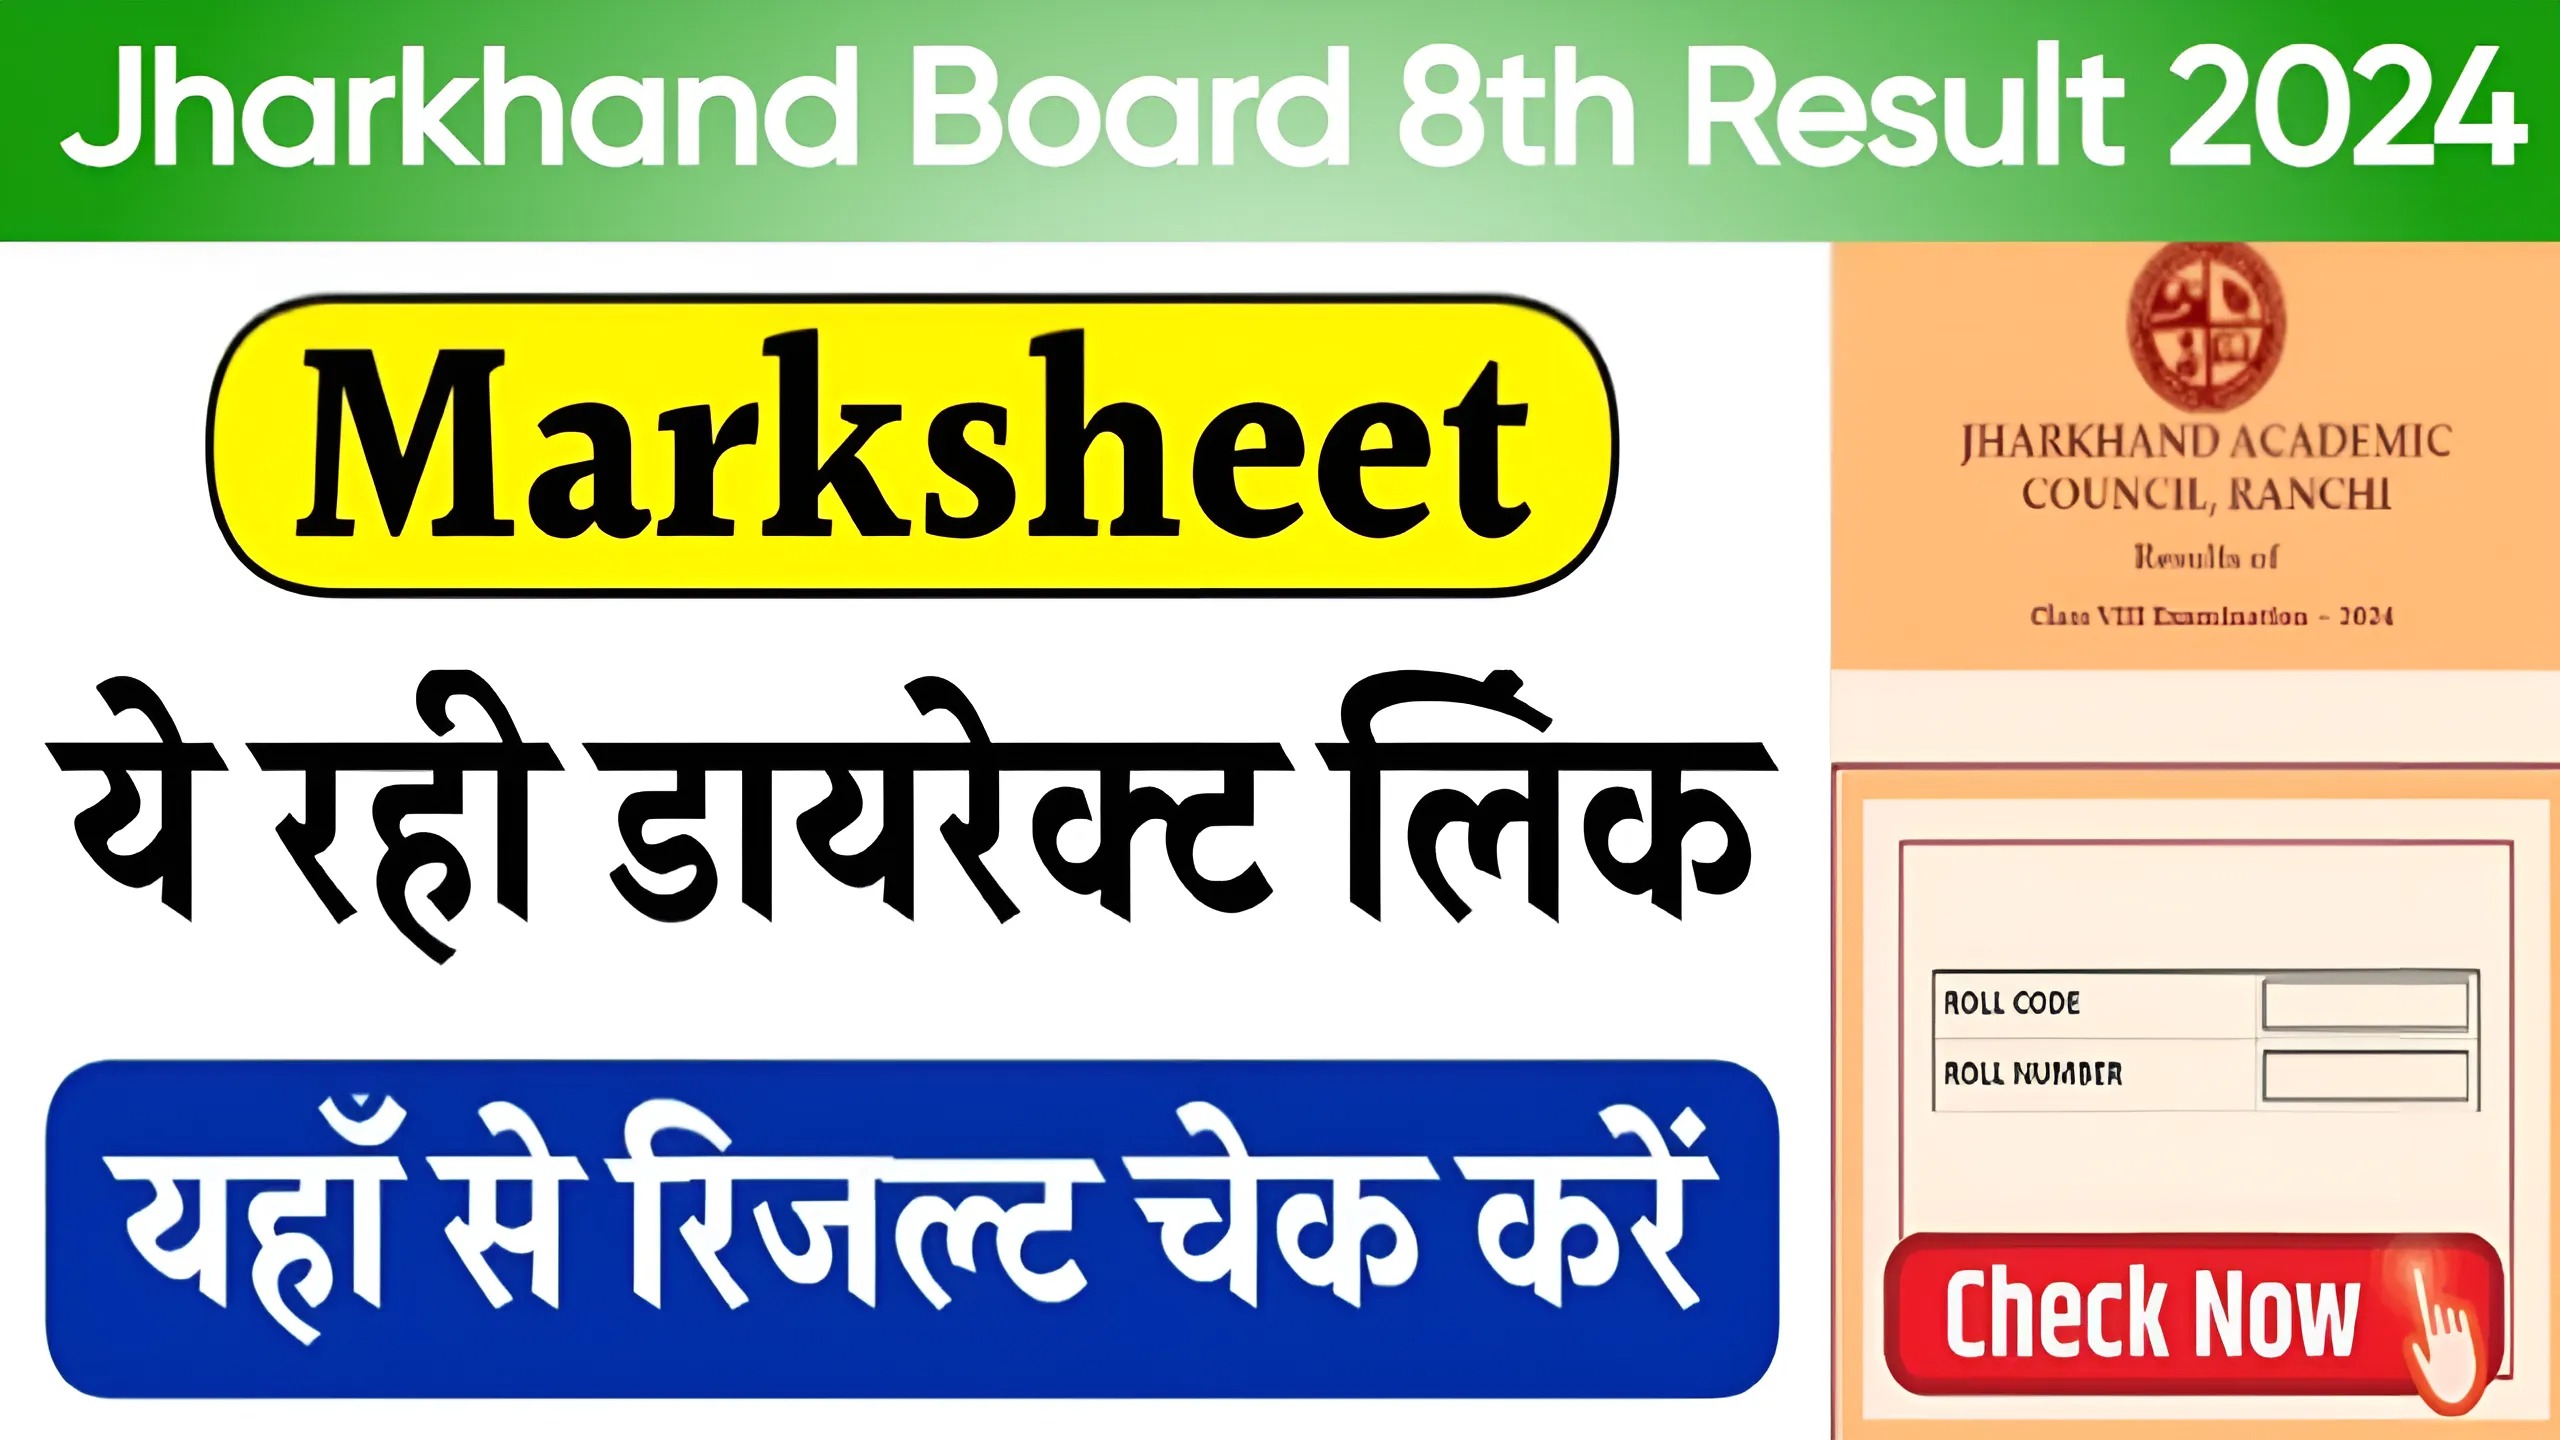 Jharkhand Board 8th Result 2024